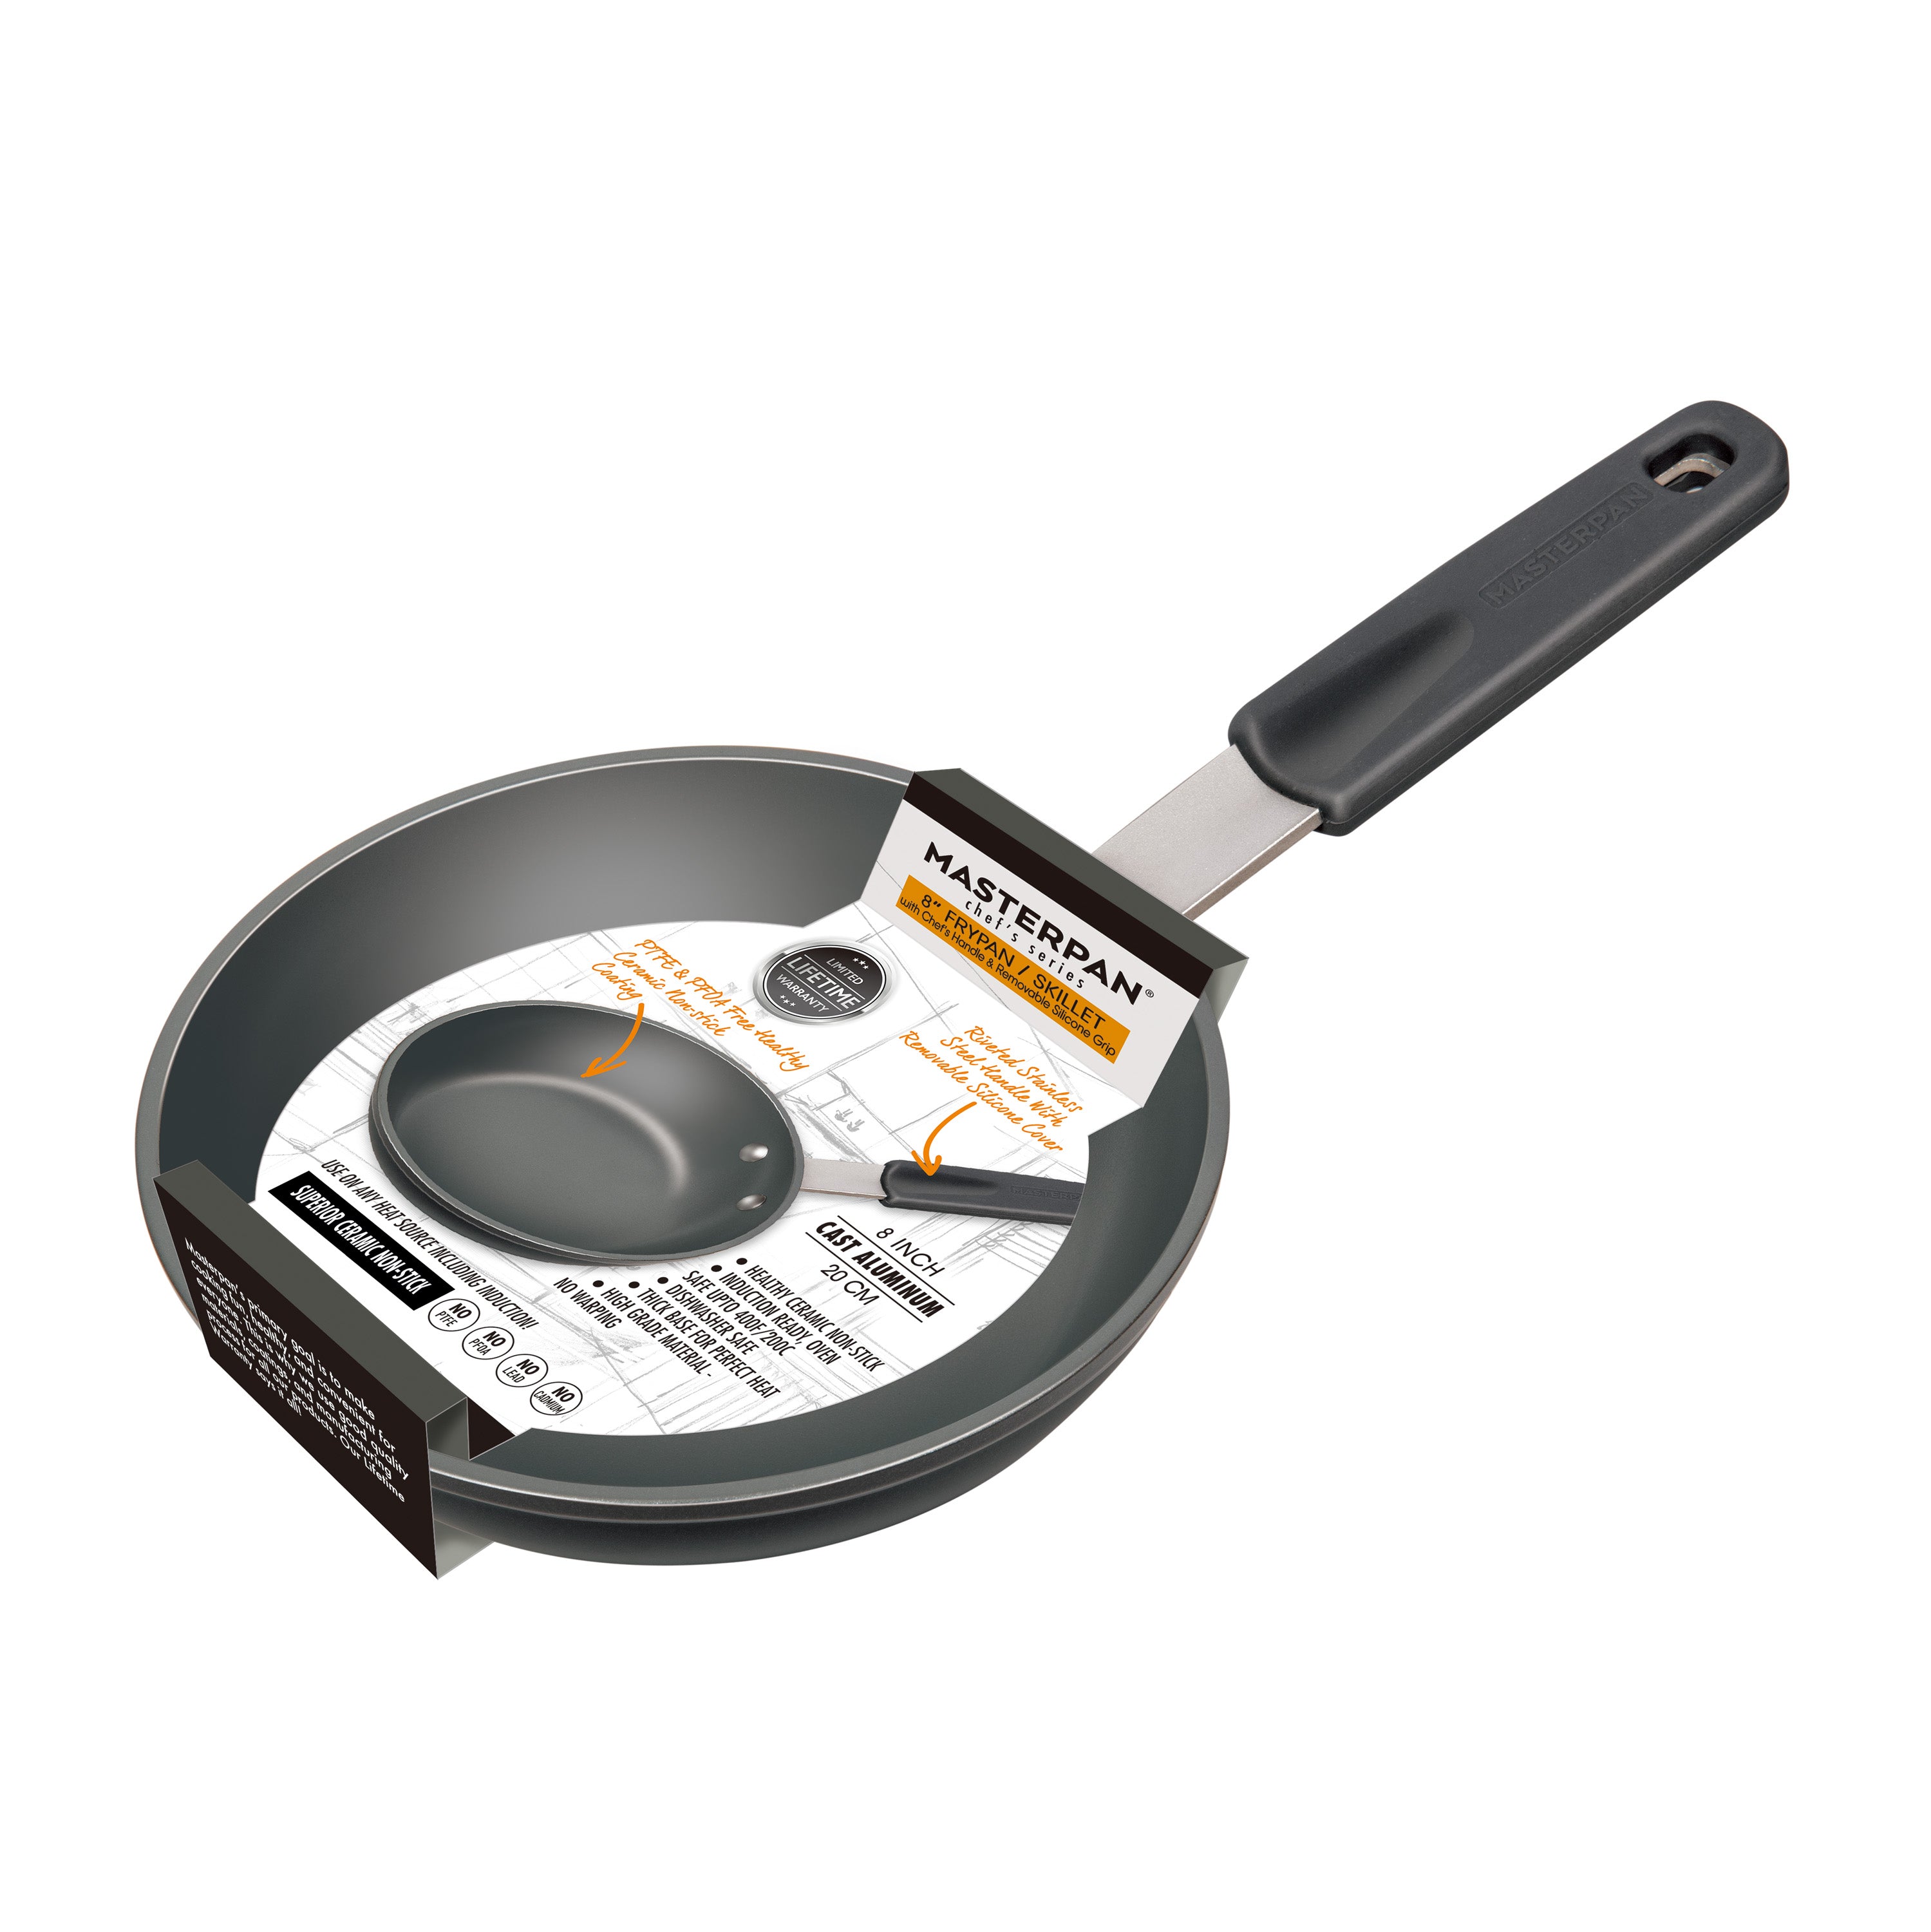 MASTERPAN Ceramic Nonstick Frypan & Skillet with Chef's Handle, 8